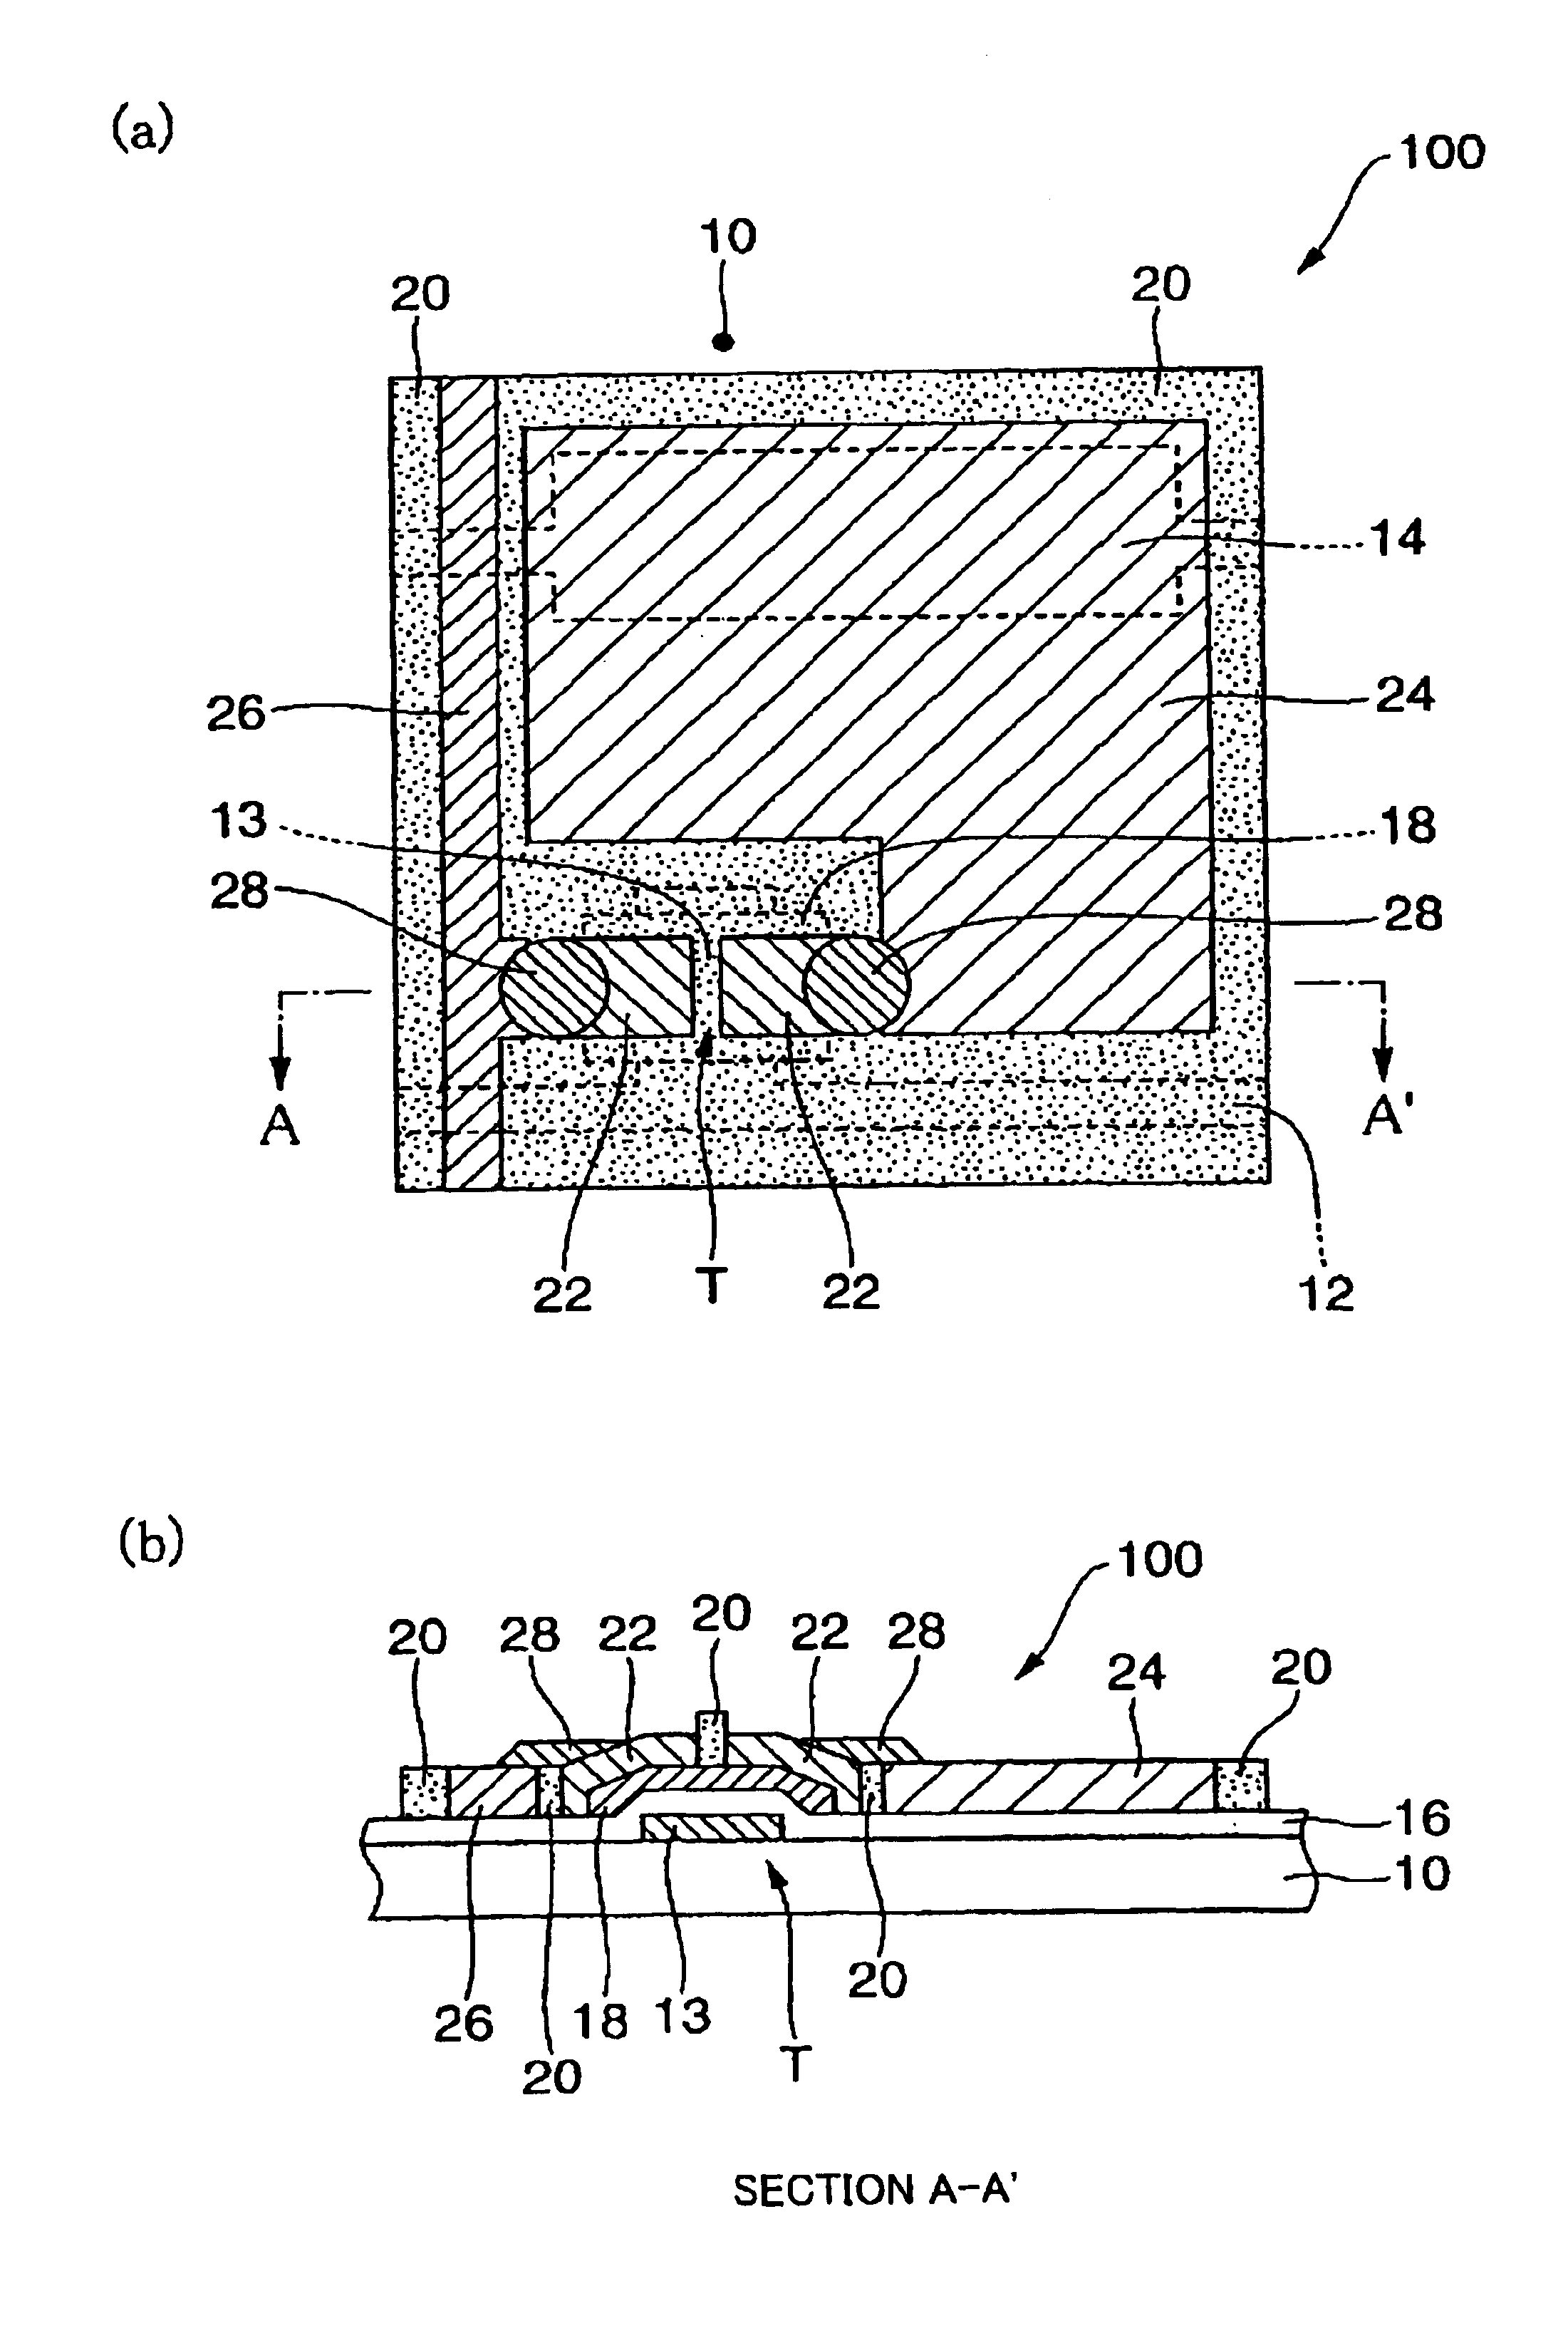 Method of manufacturing an electro-optical device